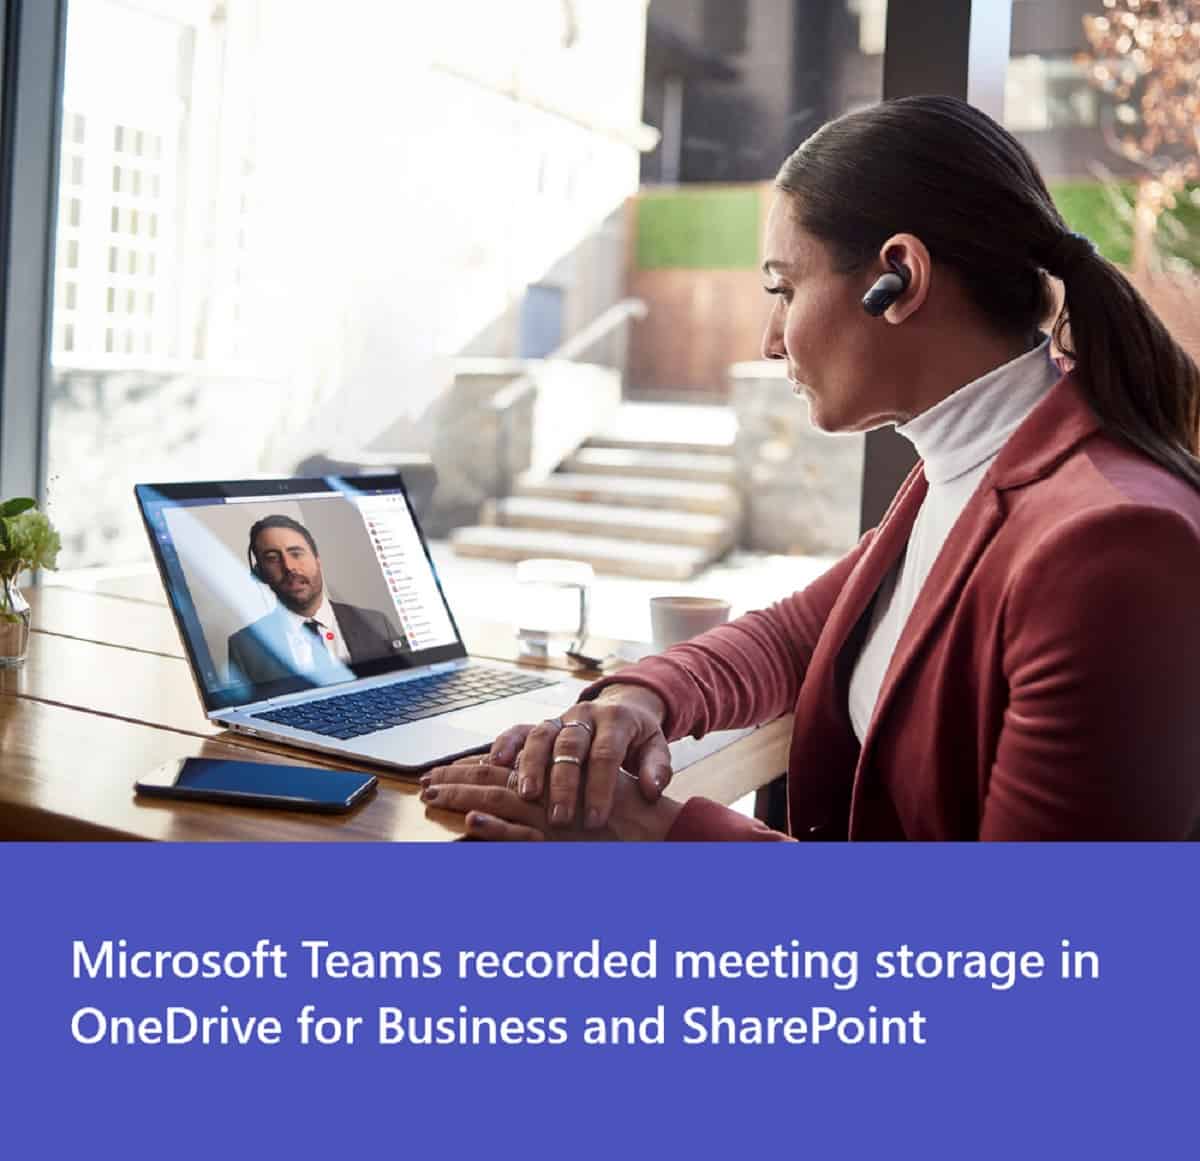 Microsoft delays switching Microsoft Teams recordings to OneDrive